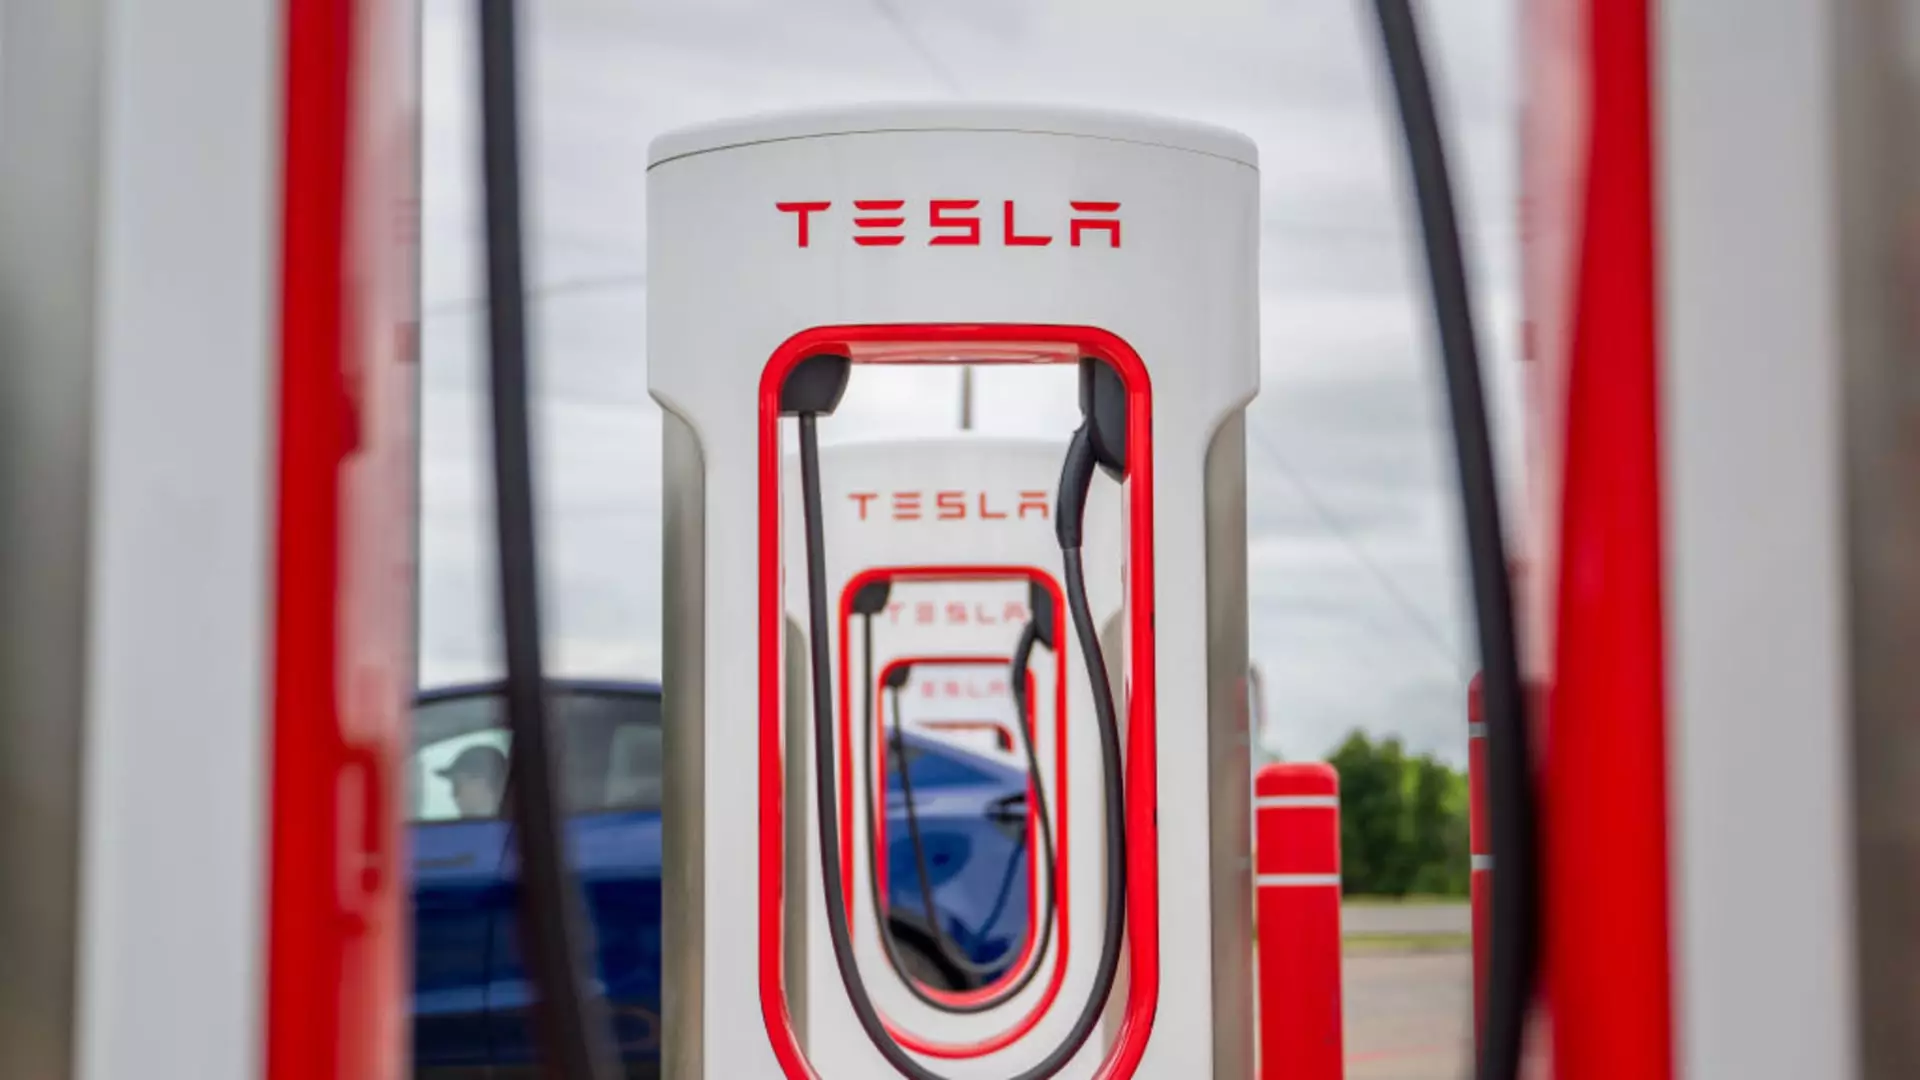 The Fallout of Tesla’s Supercharger Team Layoffs